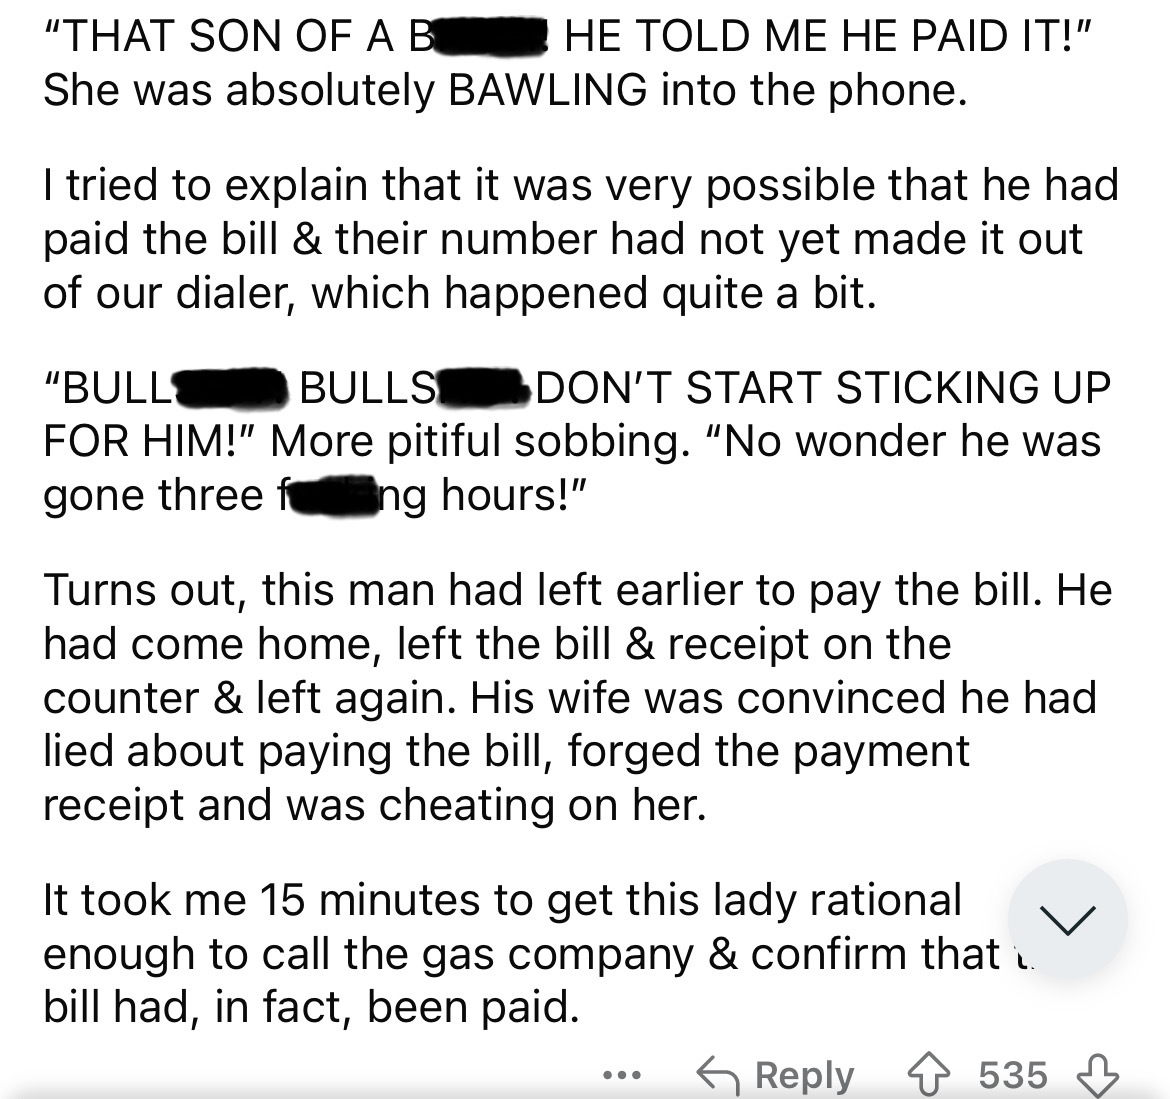 document - "That Son Of A B He Told Me He Paid It!" She was absolutely Bawling into the phone. I tried to explain that it was very possible that he had paid the bill & their number had not yet made it out of our dialer, which happened quite a bit. "Bull B